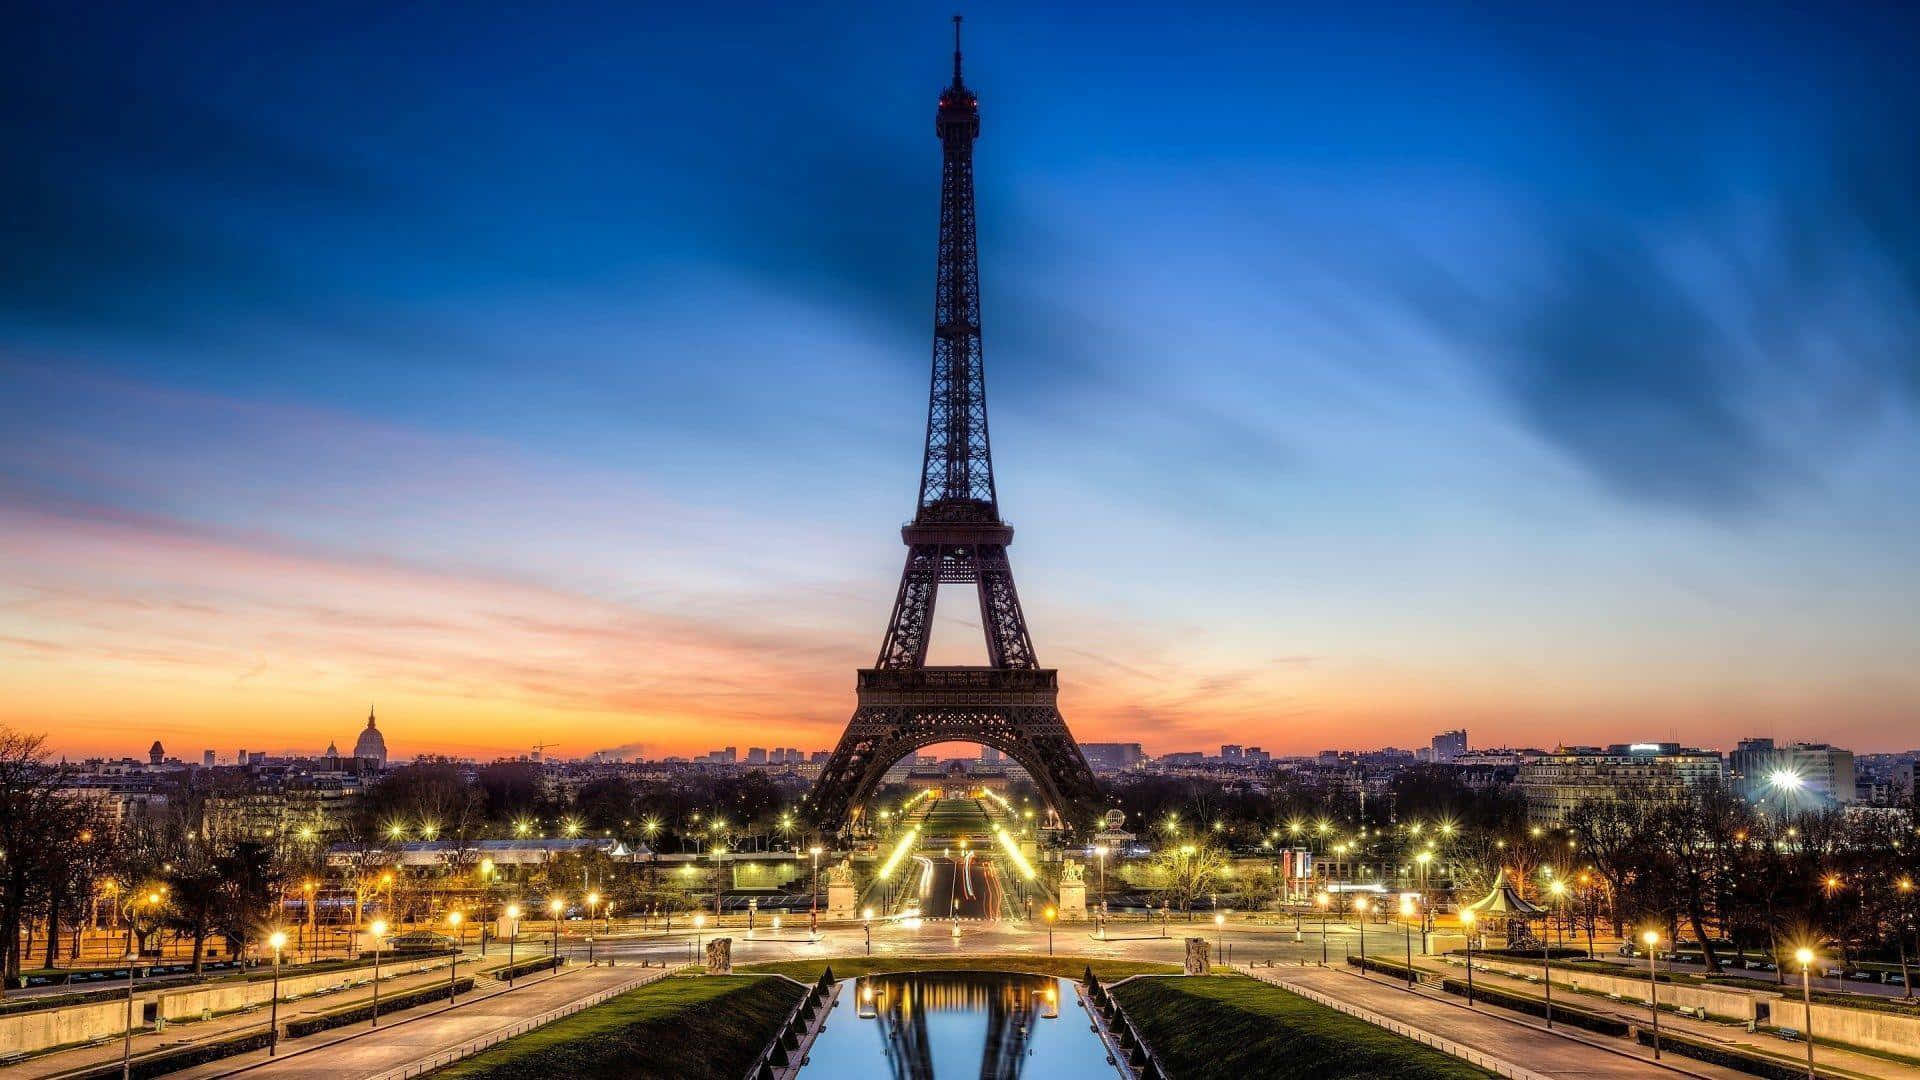 An iconic view of the Eiffel Tower against a clear sky.